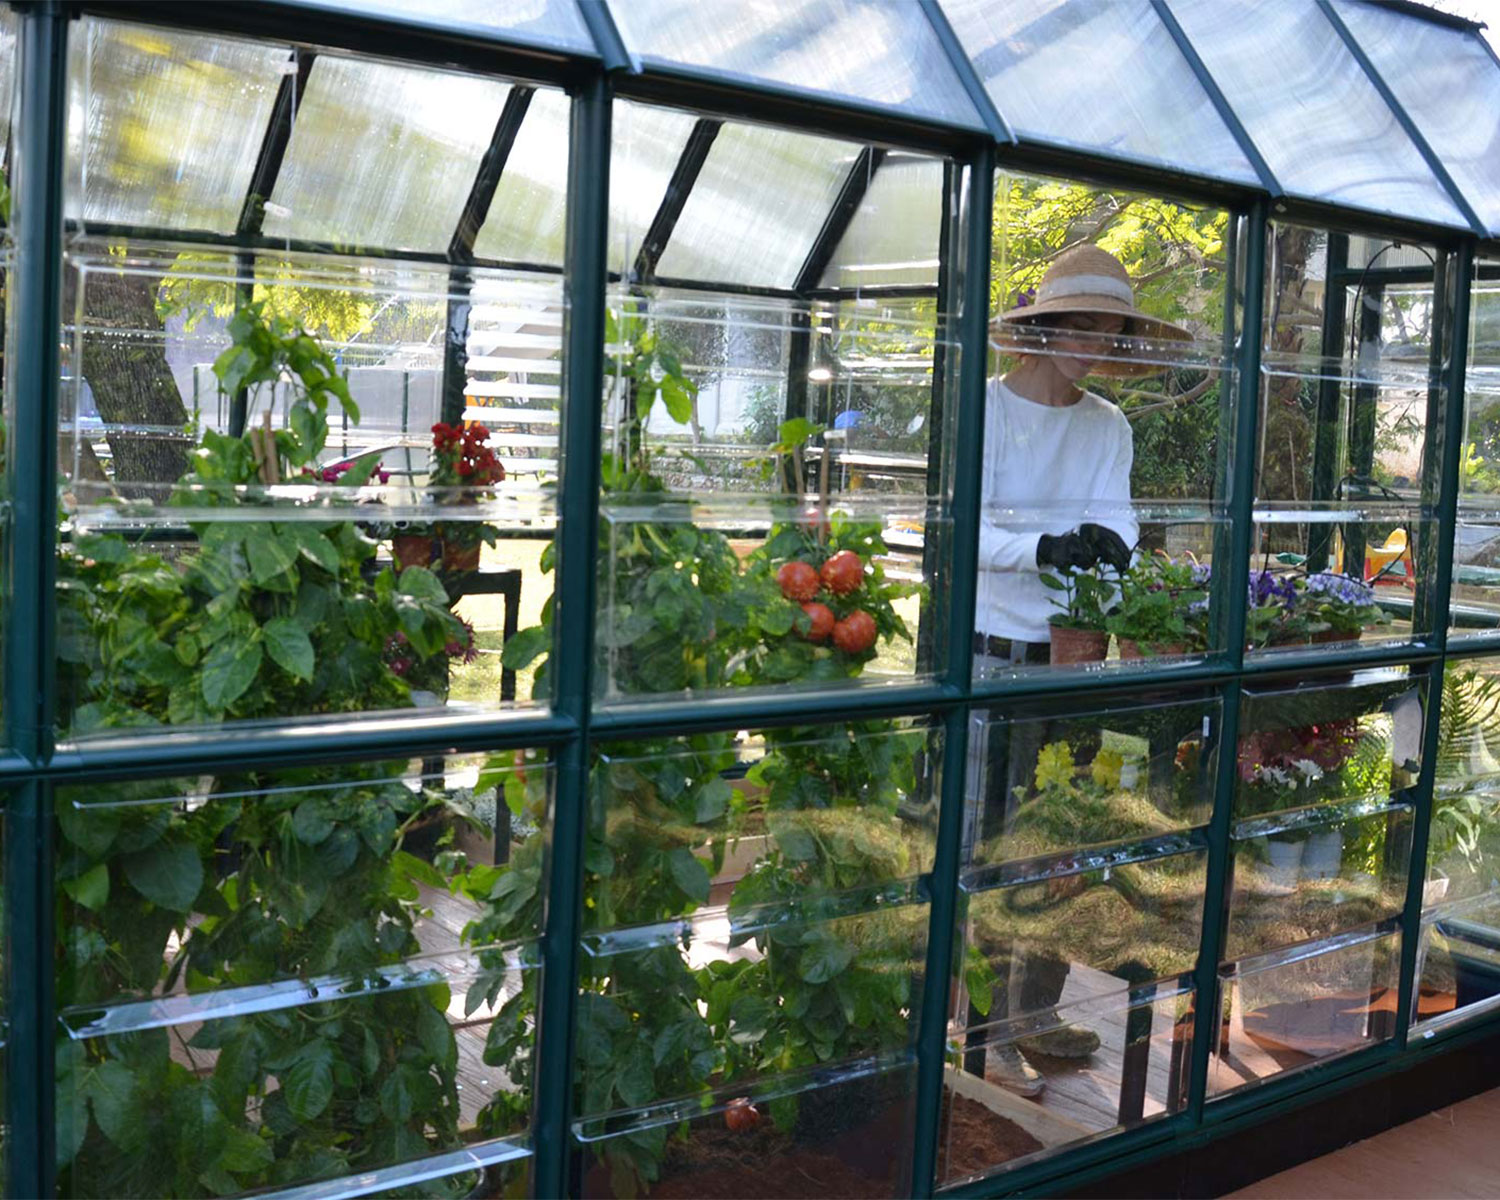 Snap & Grow 6 ft. x 12 ft. Greenhouse Silver Structure & Clear Panels growing plants close view